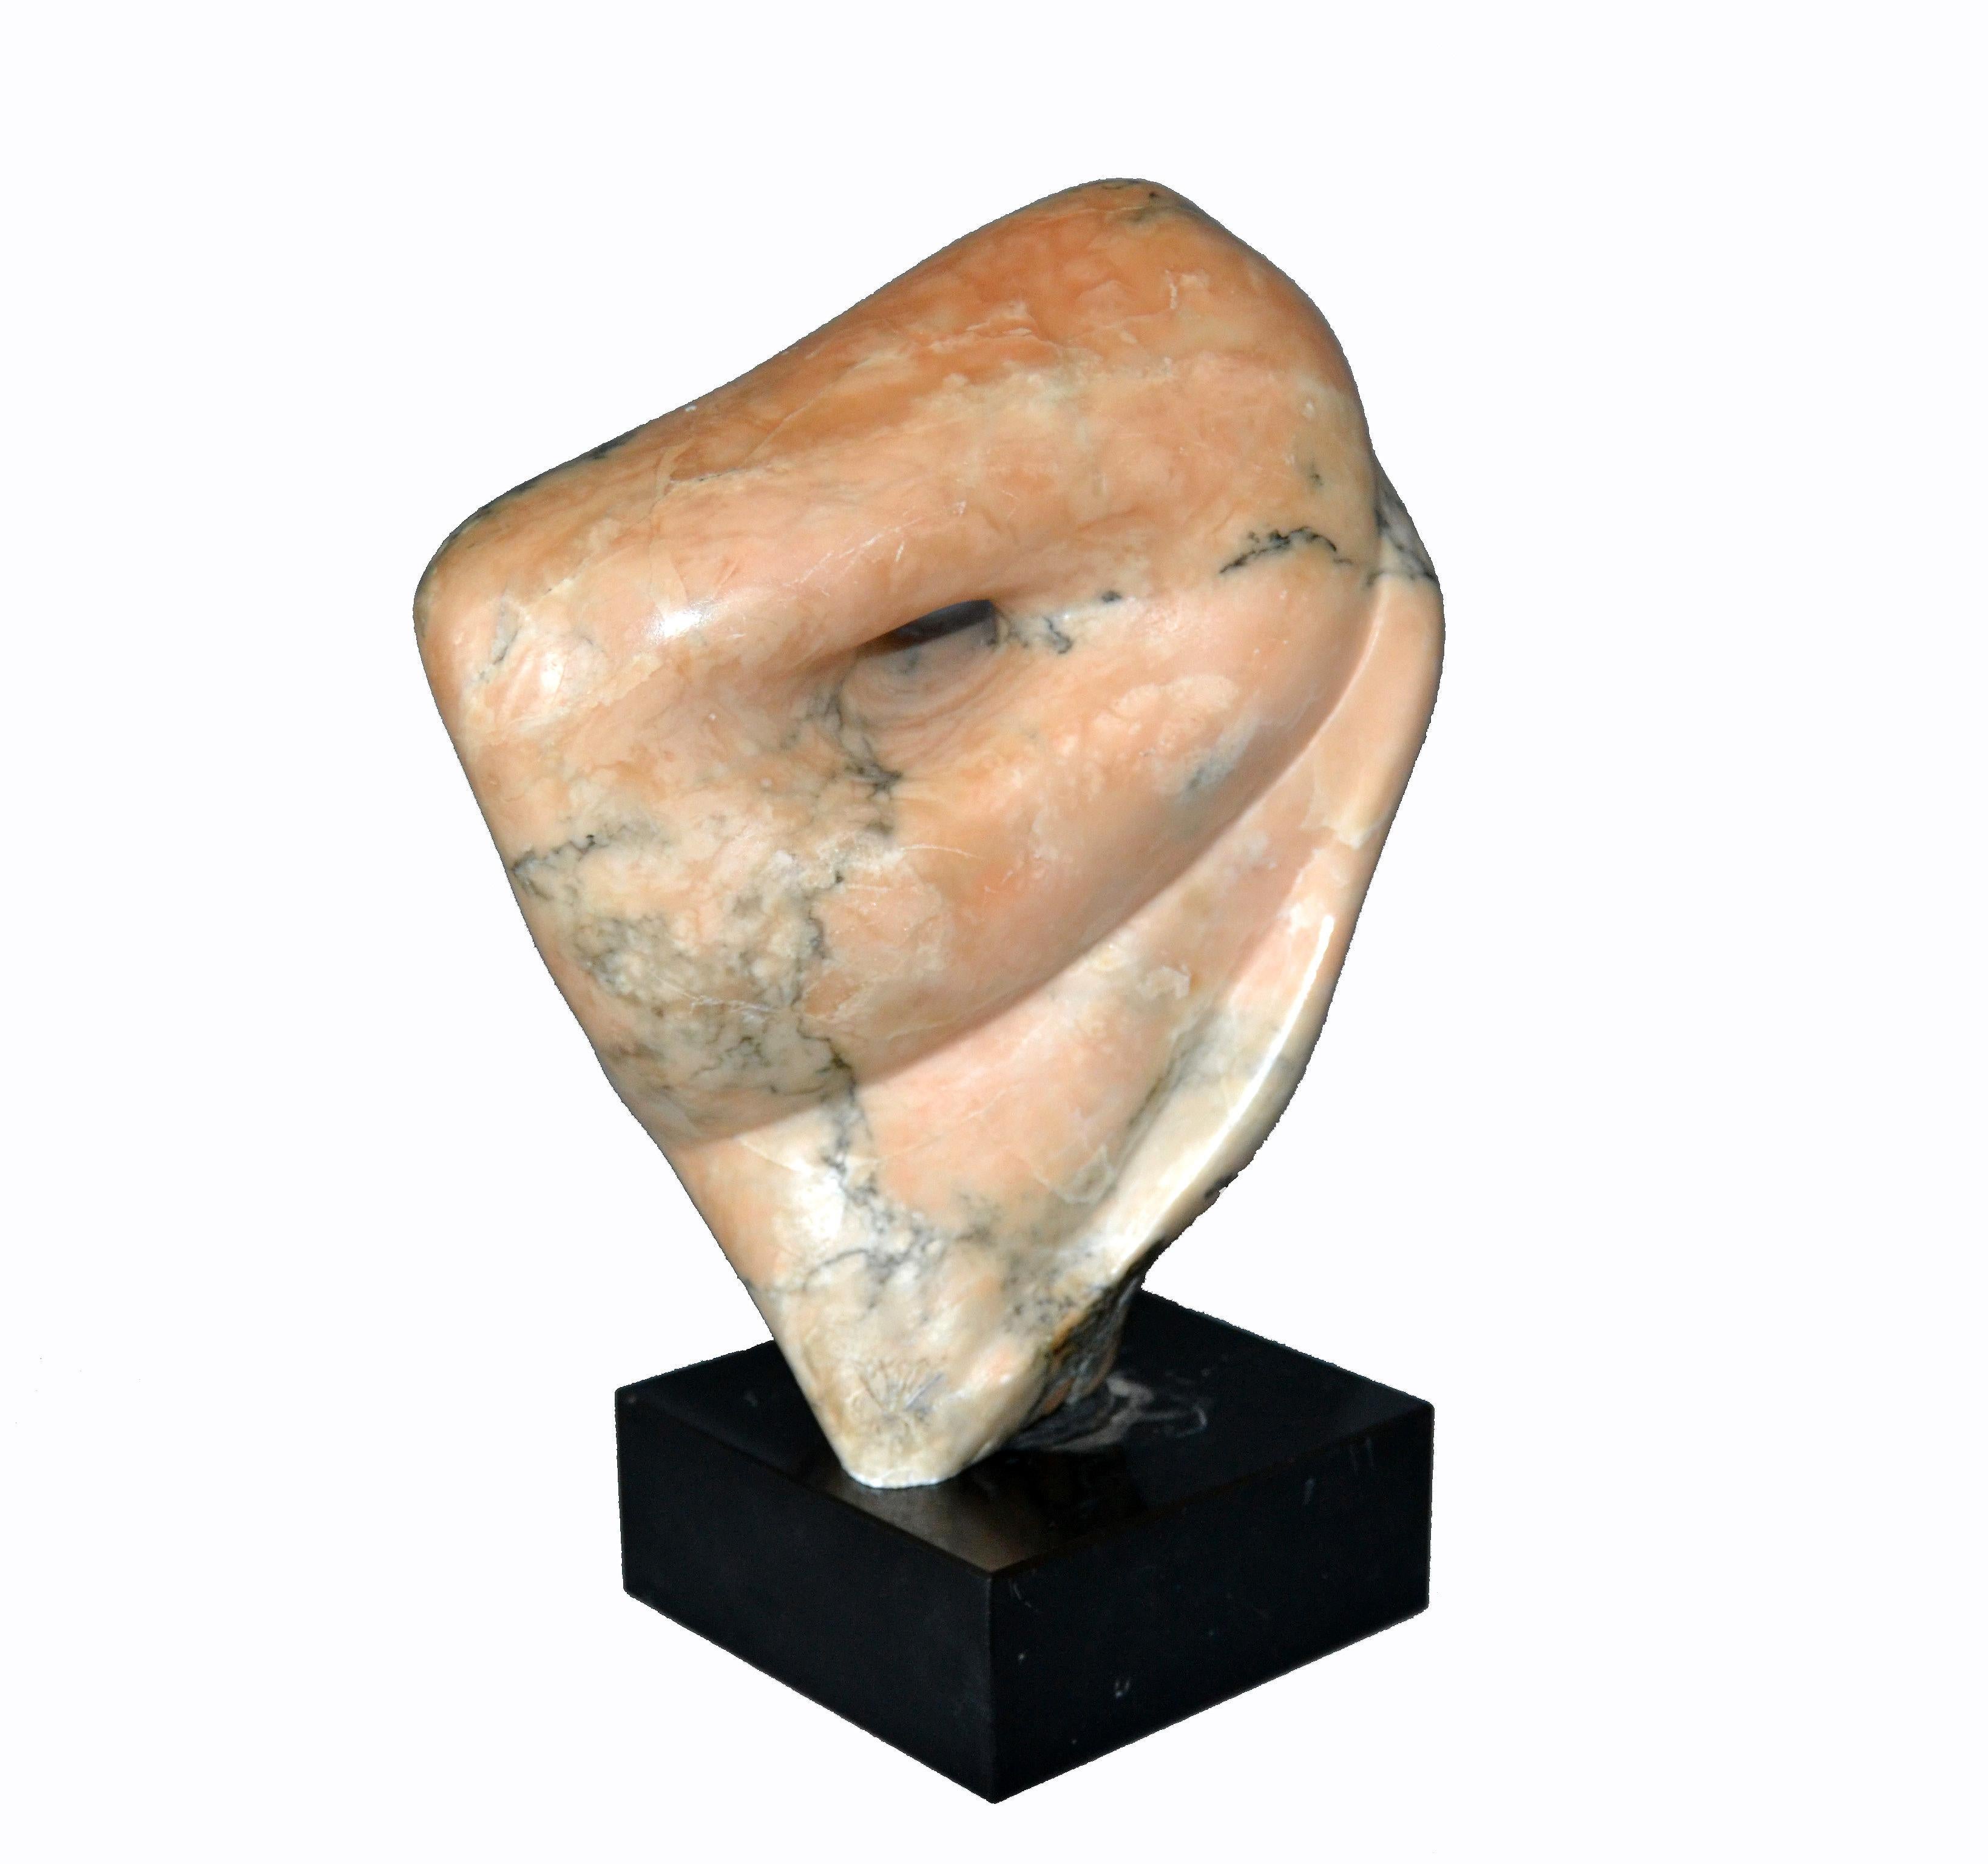 Midcentury signed abstract marble sculpture by Shapiro mounted on a black marble base.
Note the stunning natural grain pattern of the marble and the biomorphic shapes.
Artist mark at the bottom of the sculpture.